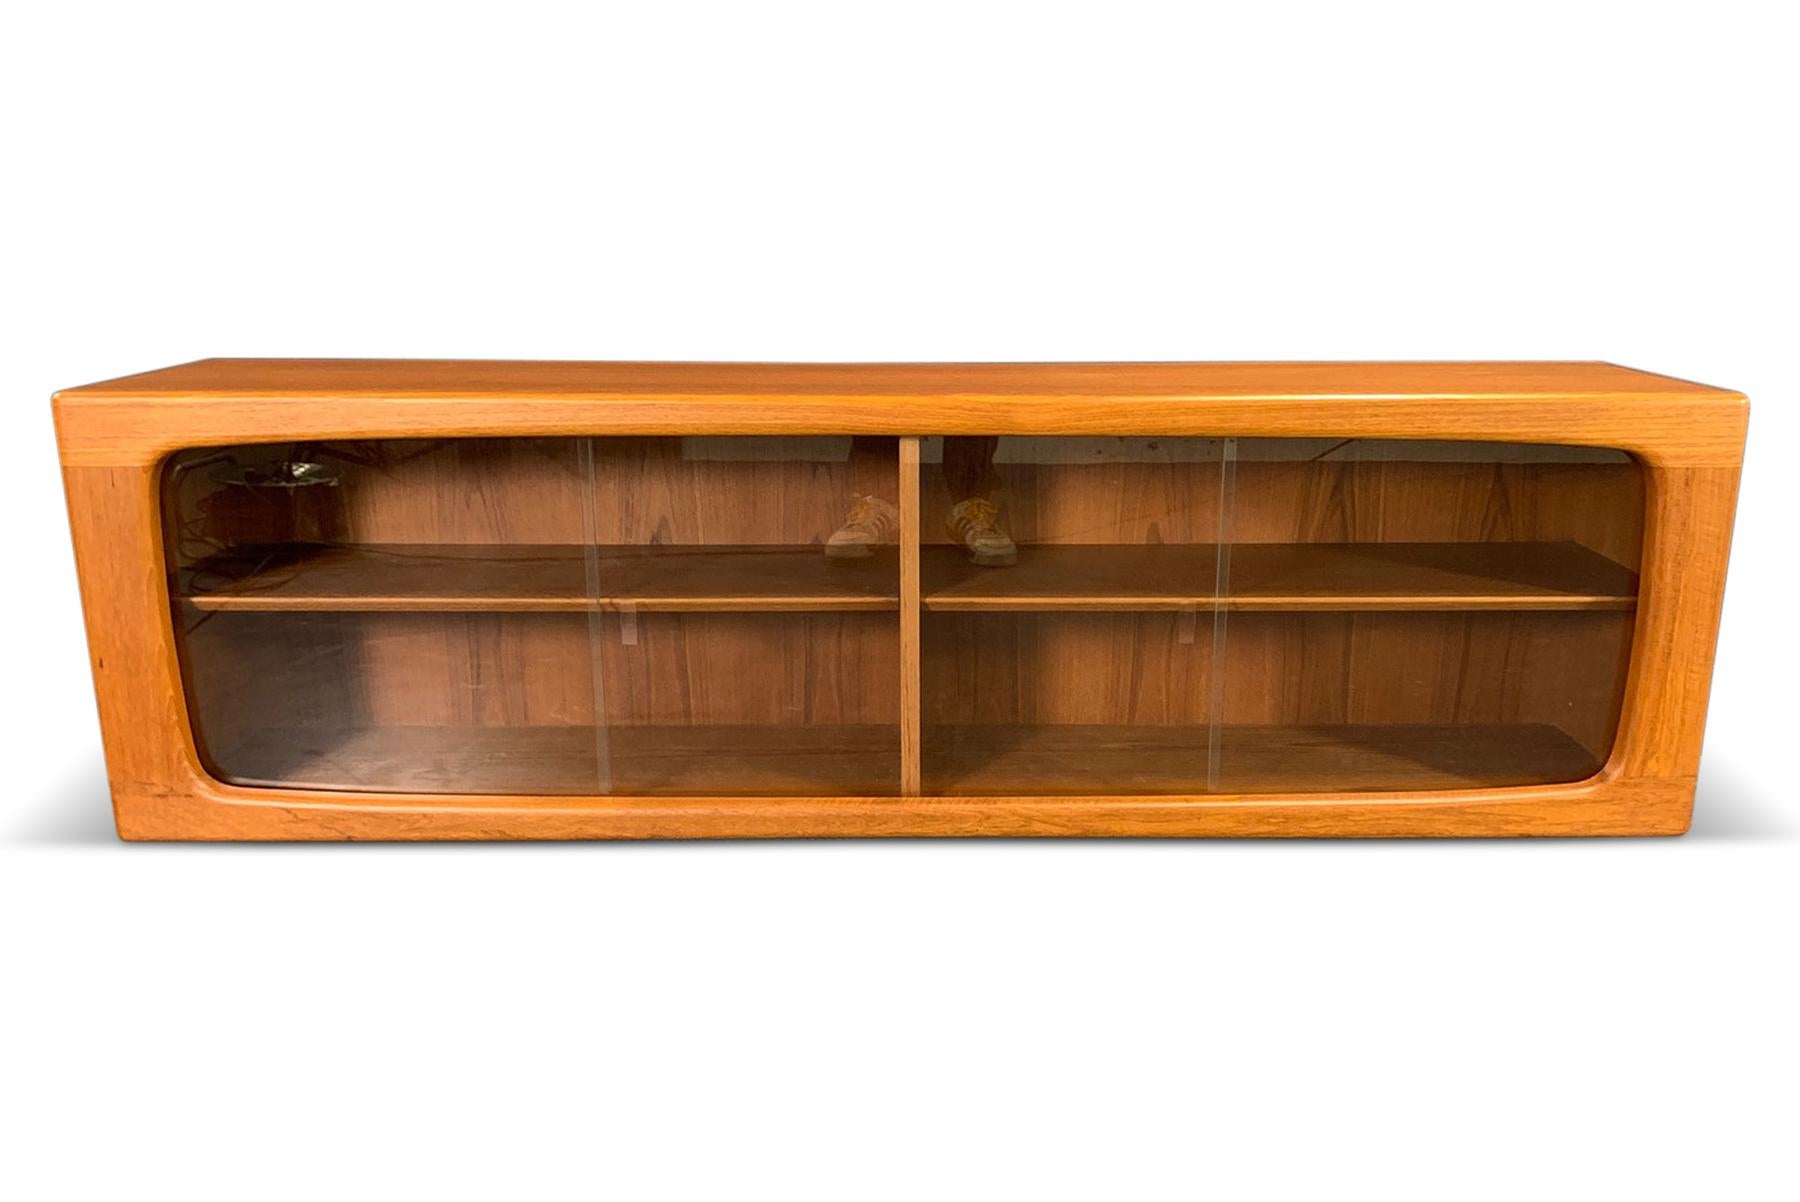 Glass Floating / Wall Mounted Teak Credenza by Silkeborg